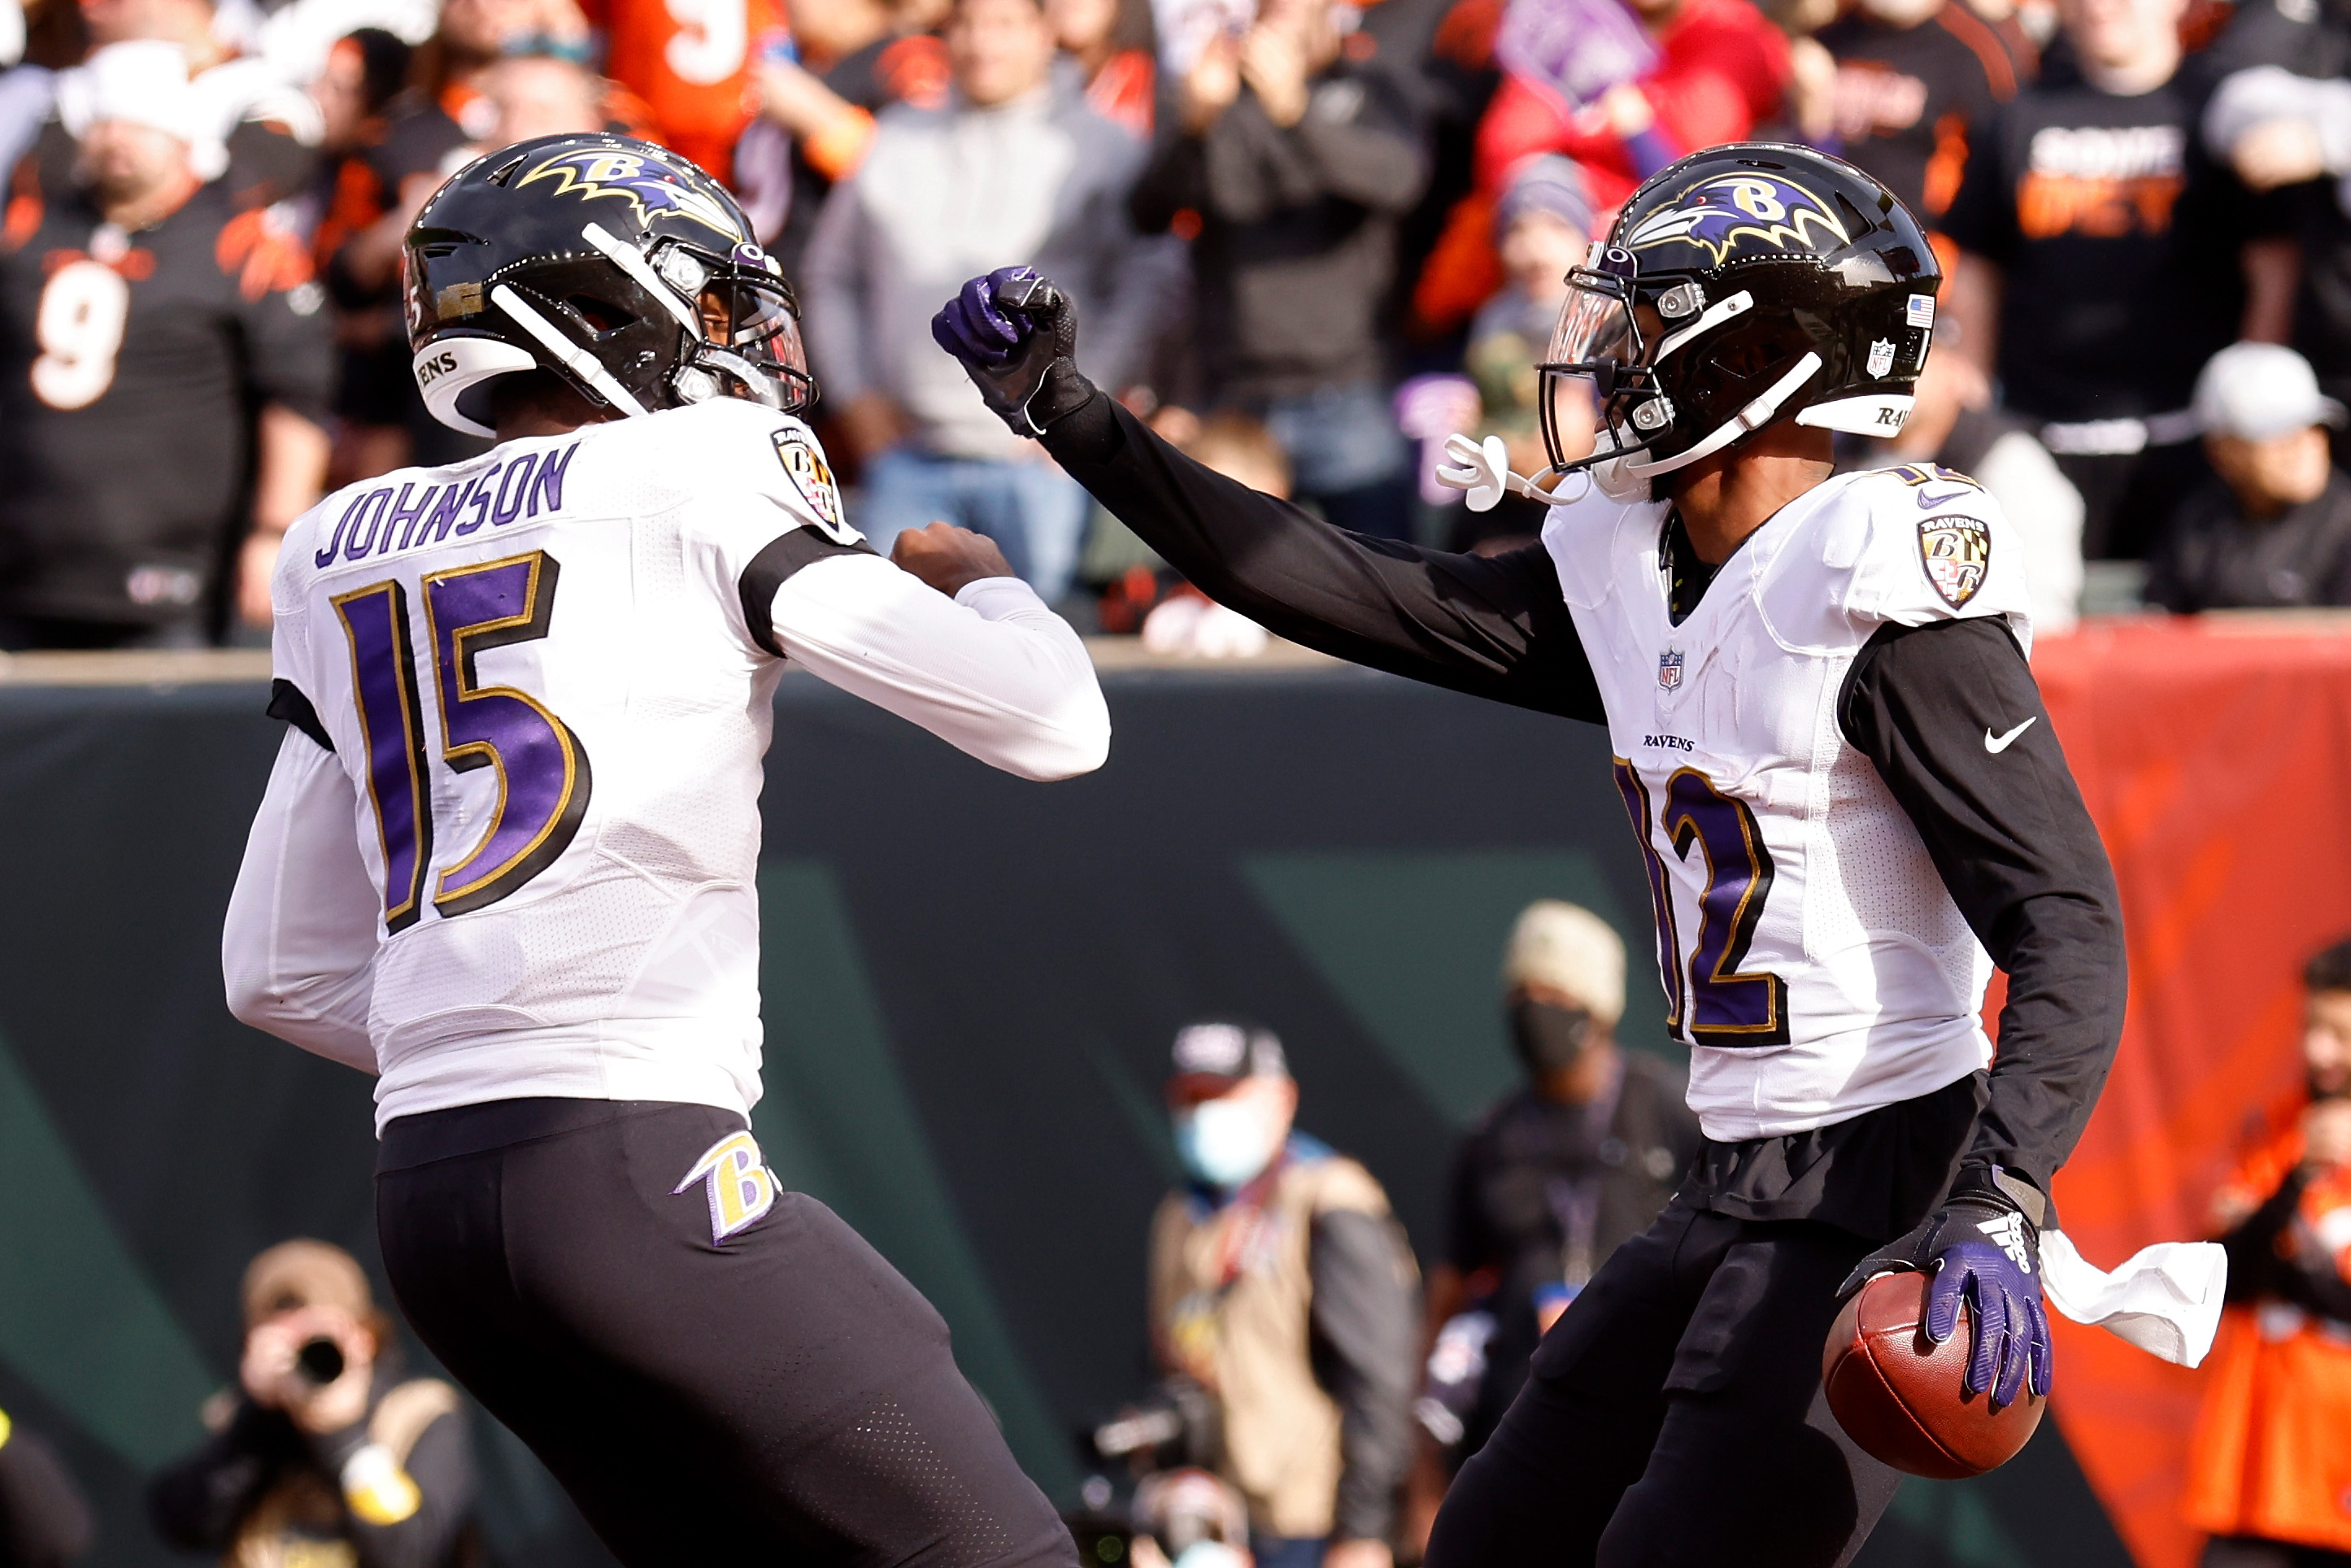 Josh Johnson threw two touchdown passes in his cameo with Baltimore Sunday